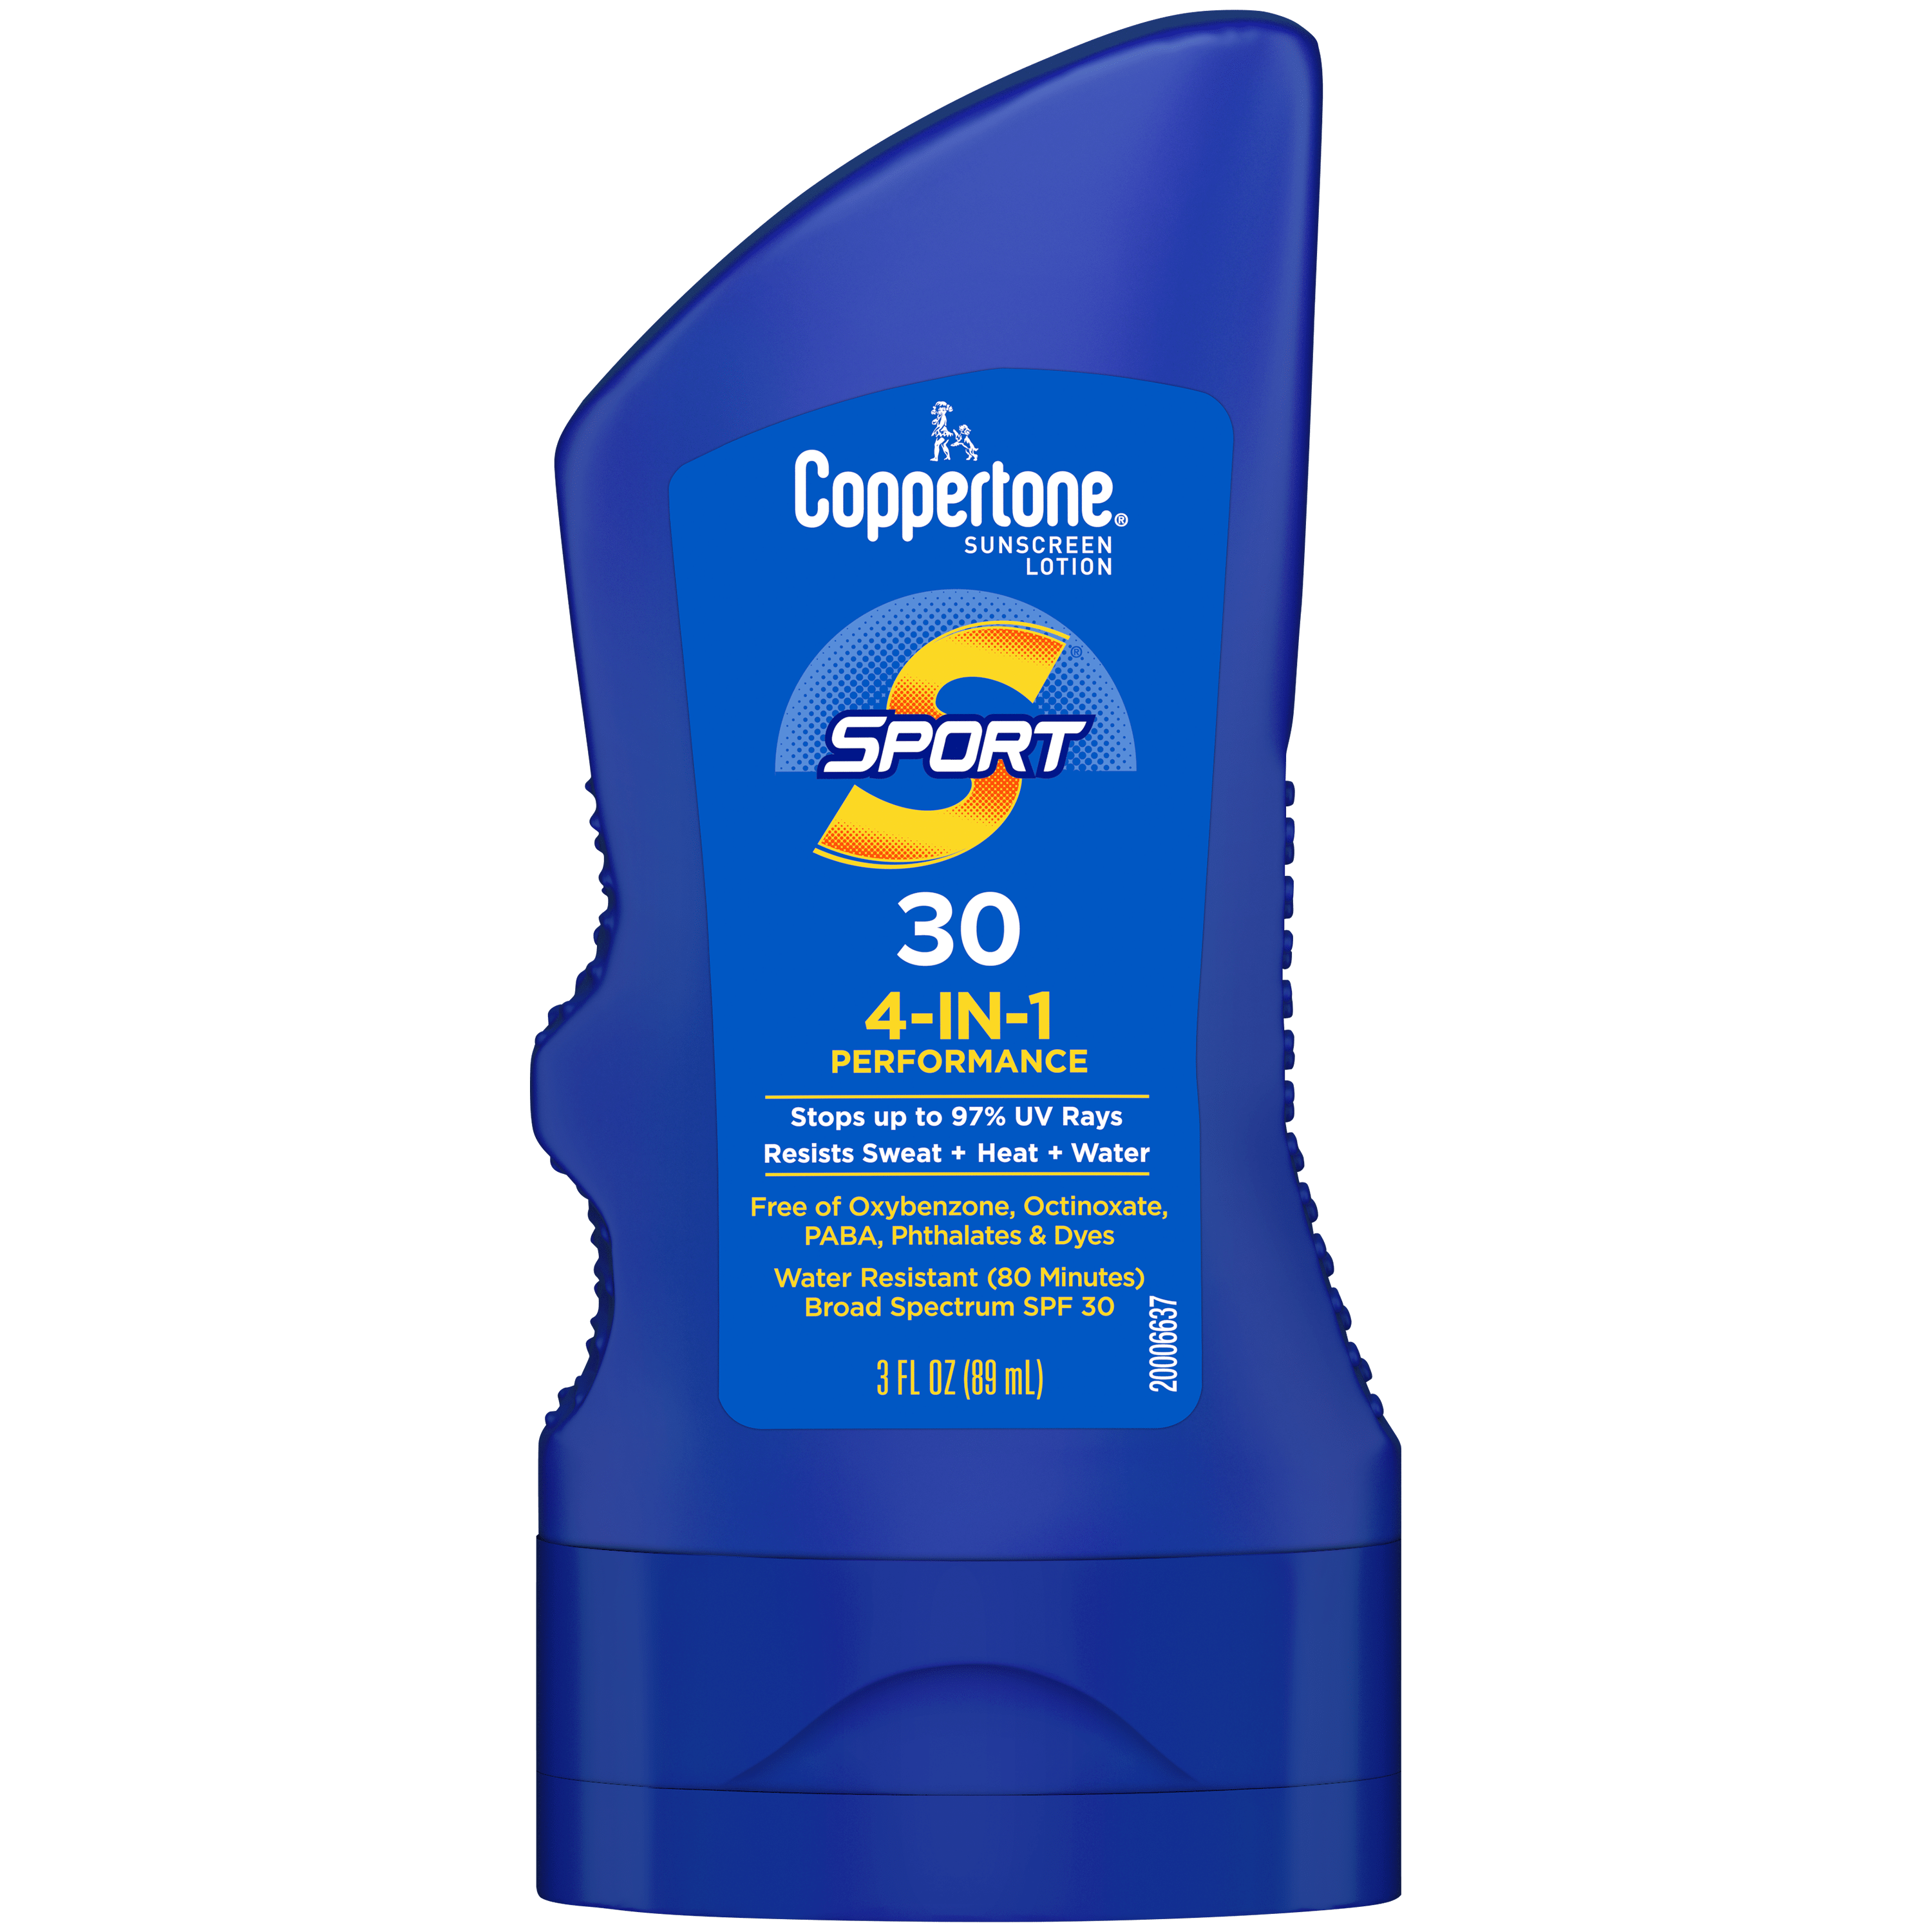 SPORT SPF 30 LOTION TRAVEL SIZE